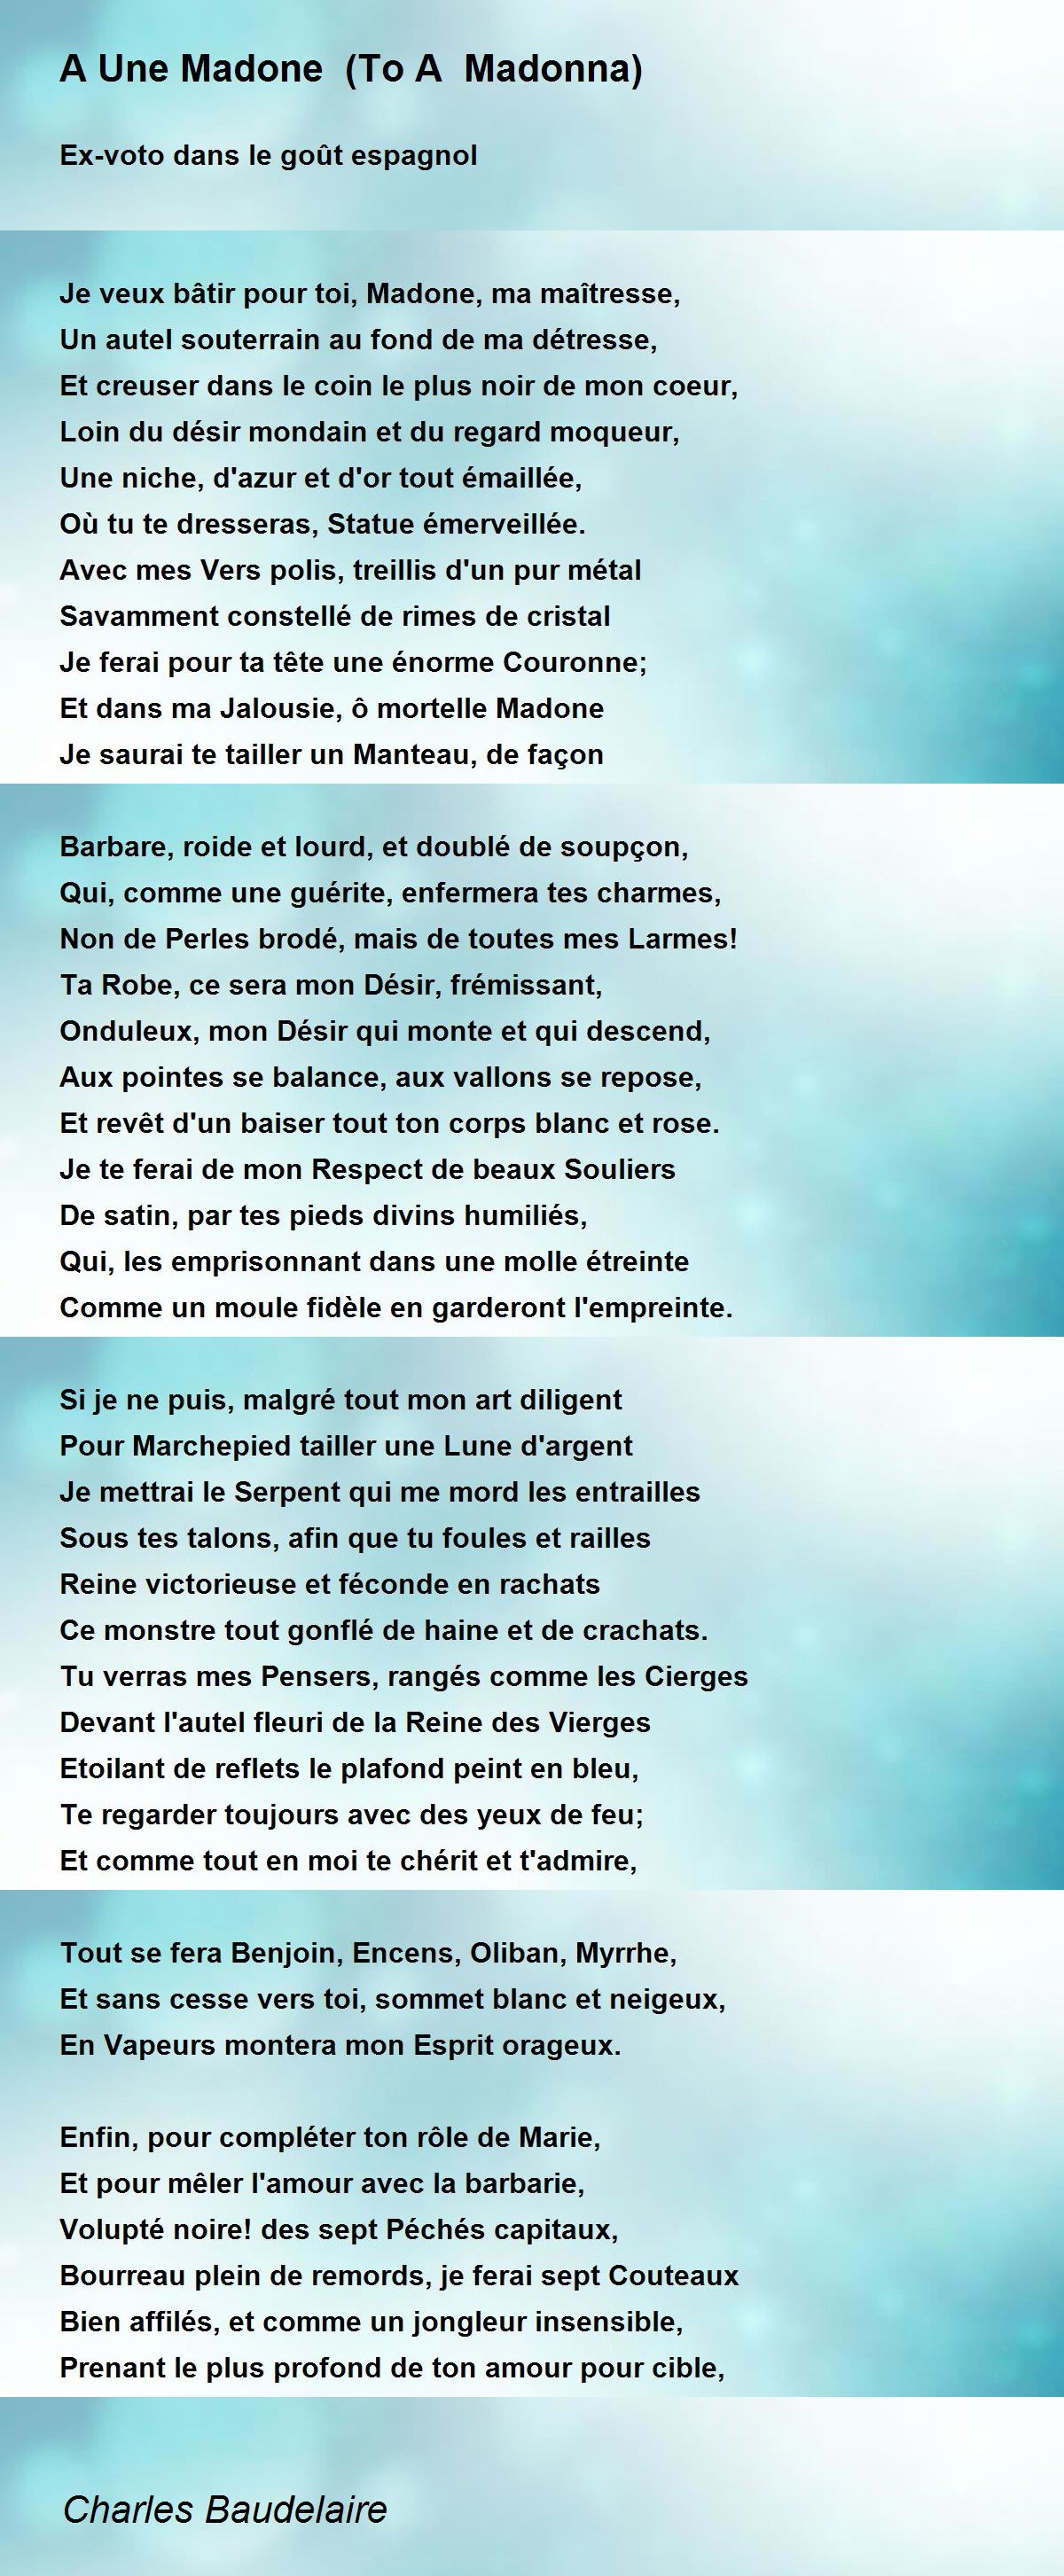 A Une Madone To A Madonna Poem By Charles Baudelaire